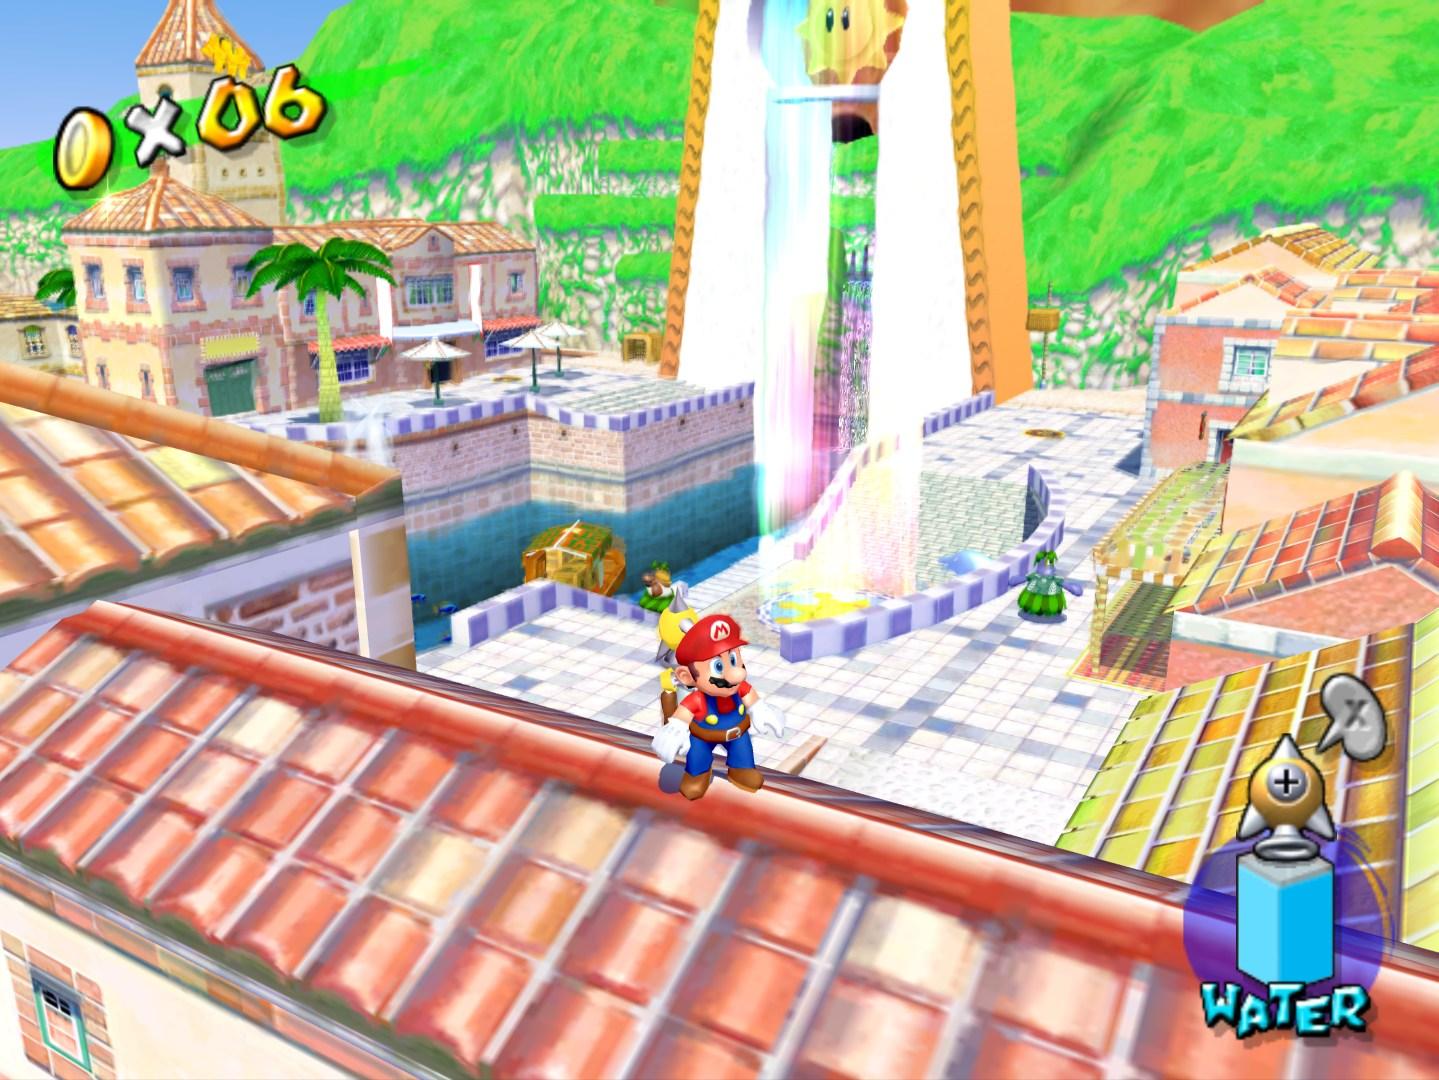 Super Mario Sunshine screenshots, image and pictures